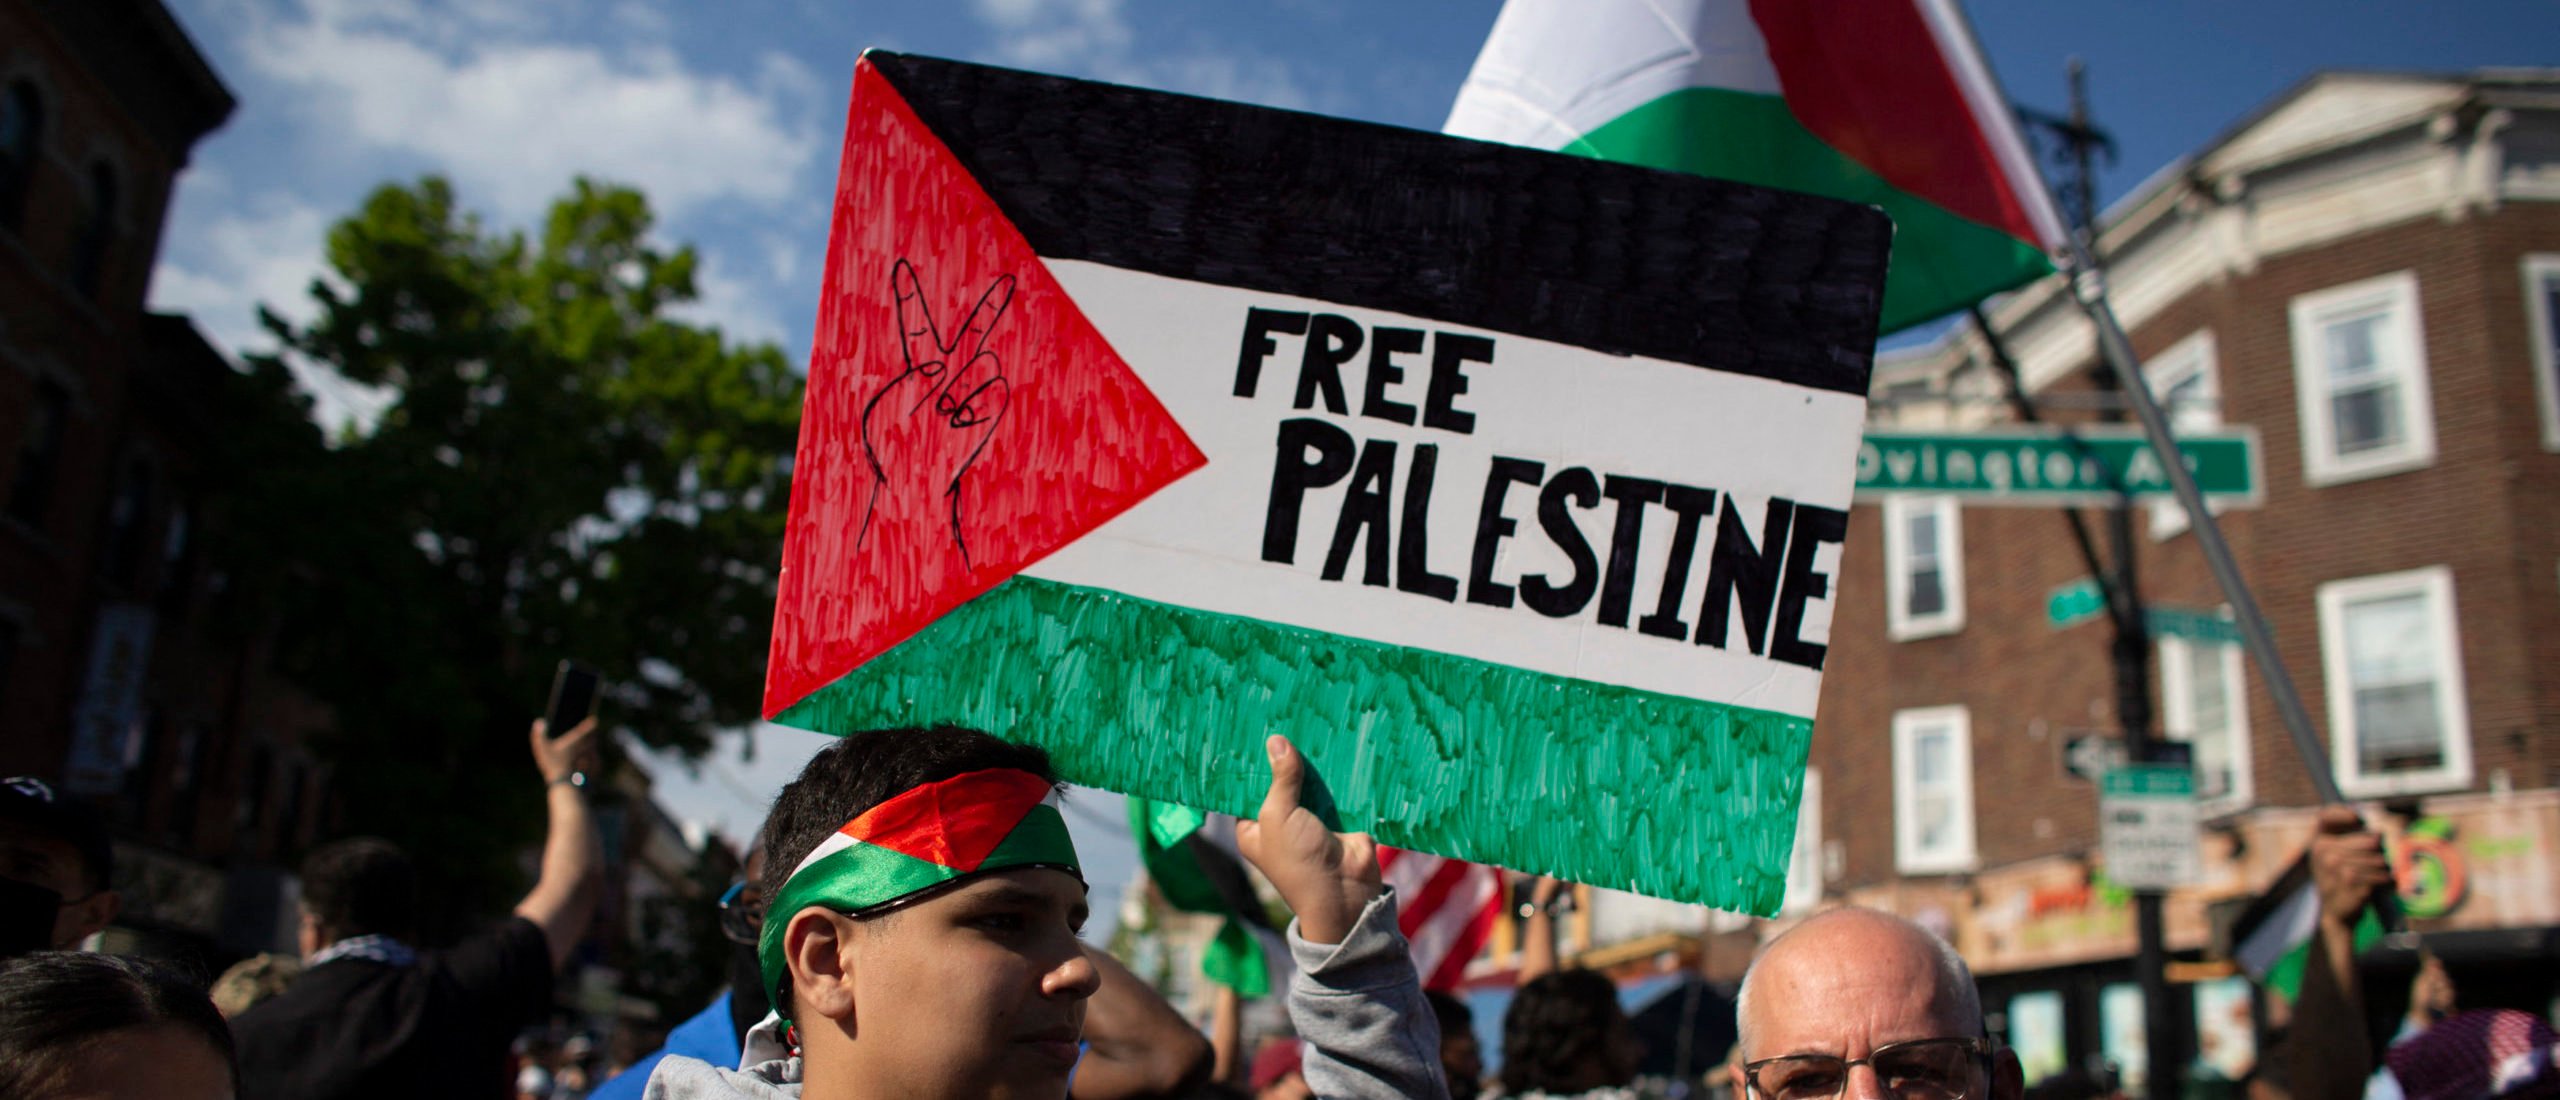 A man holds a "Free Palestine" sign during a demonstration in support of Palestine in Brooklyn, New York on May 15, 2021.